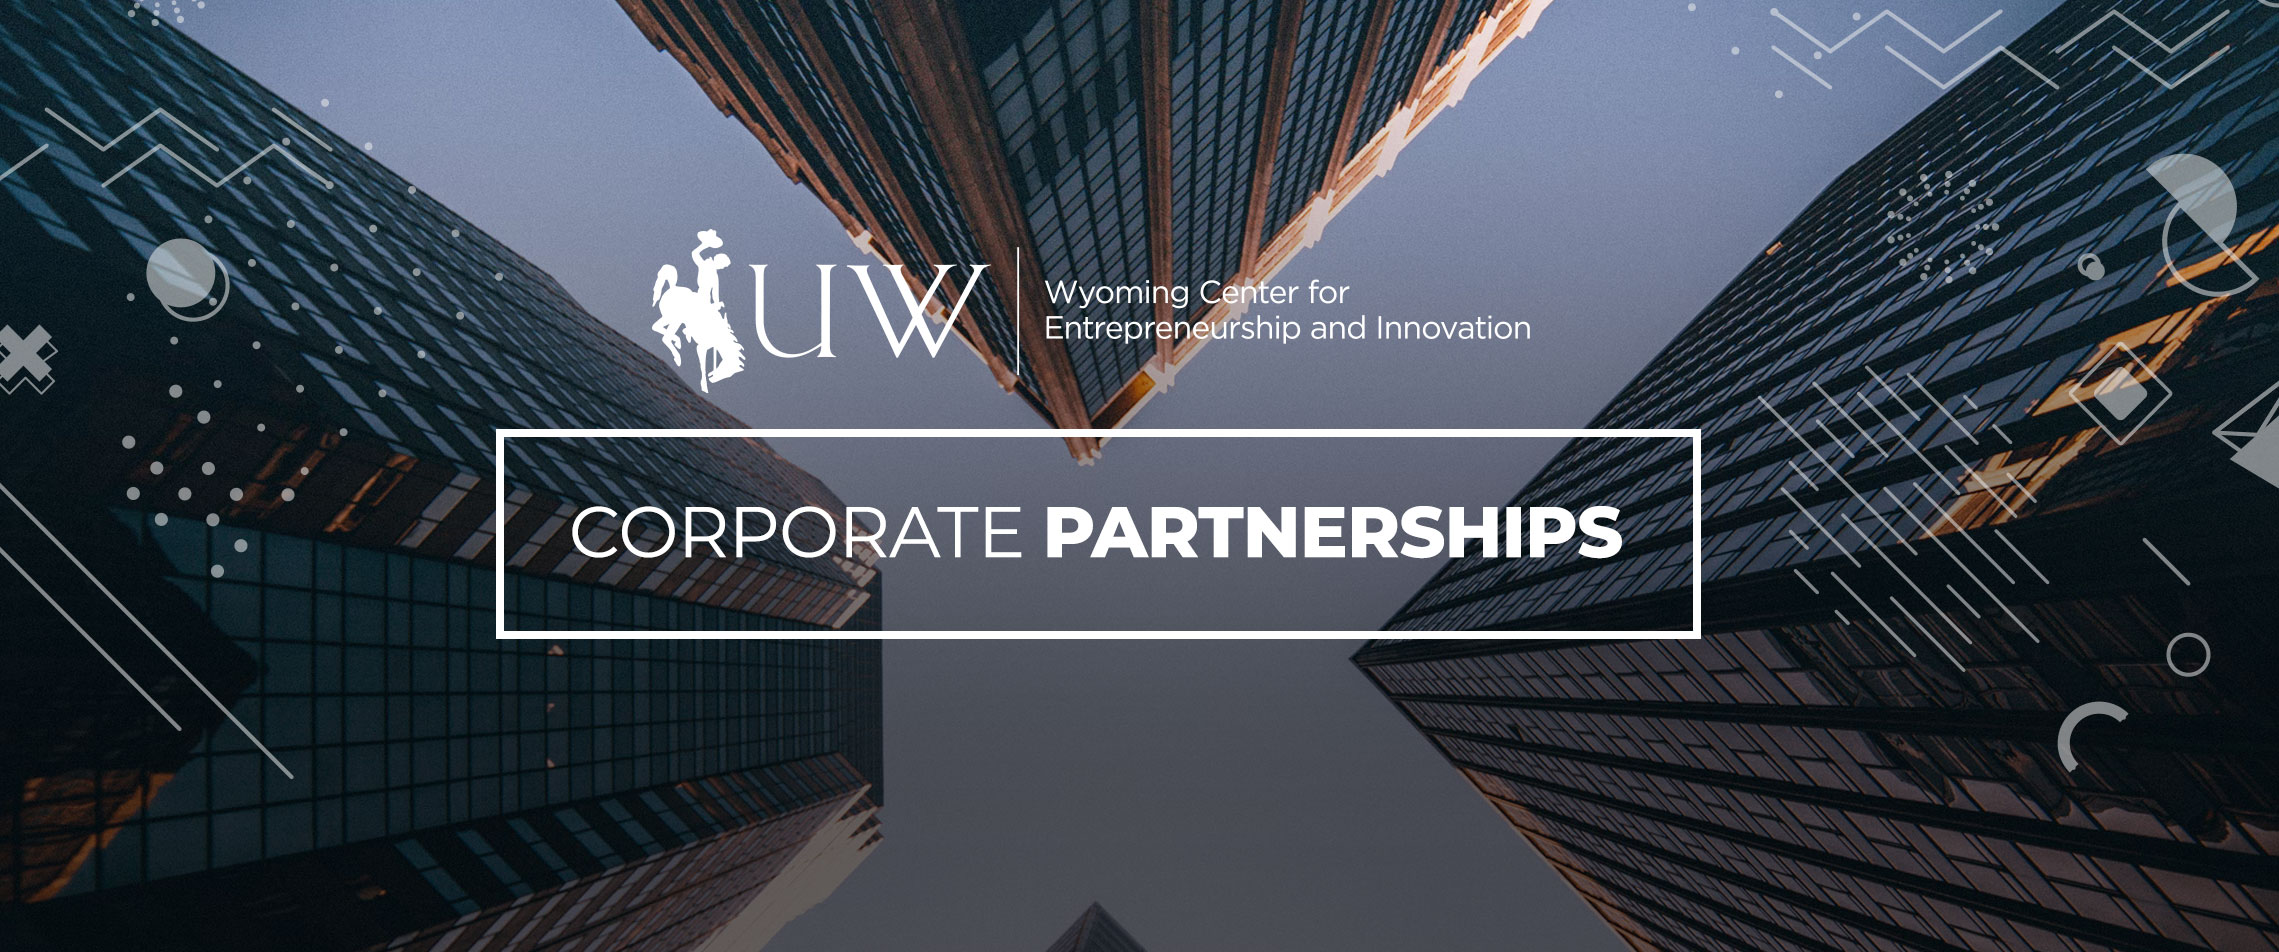 Buildings with Corporate Partnerships and University of Wyoming Center for Entrepreneurship & Innovation logo